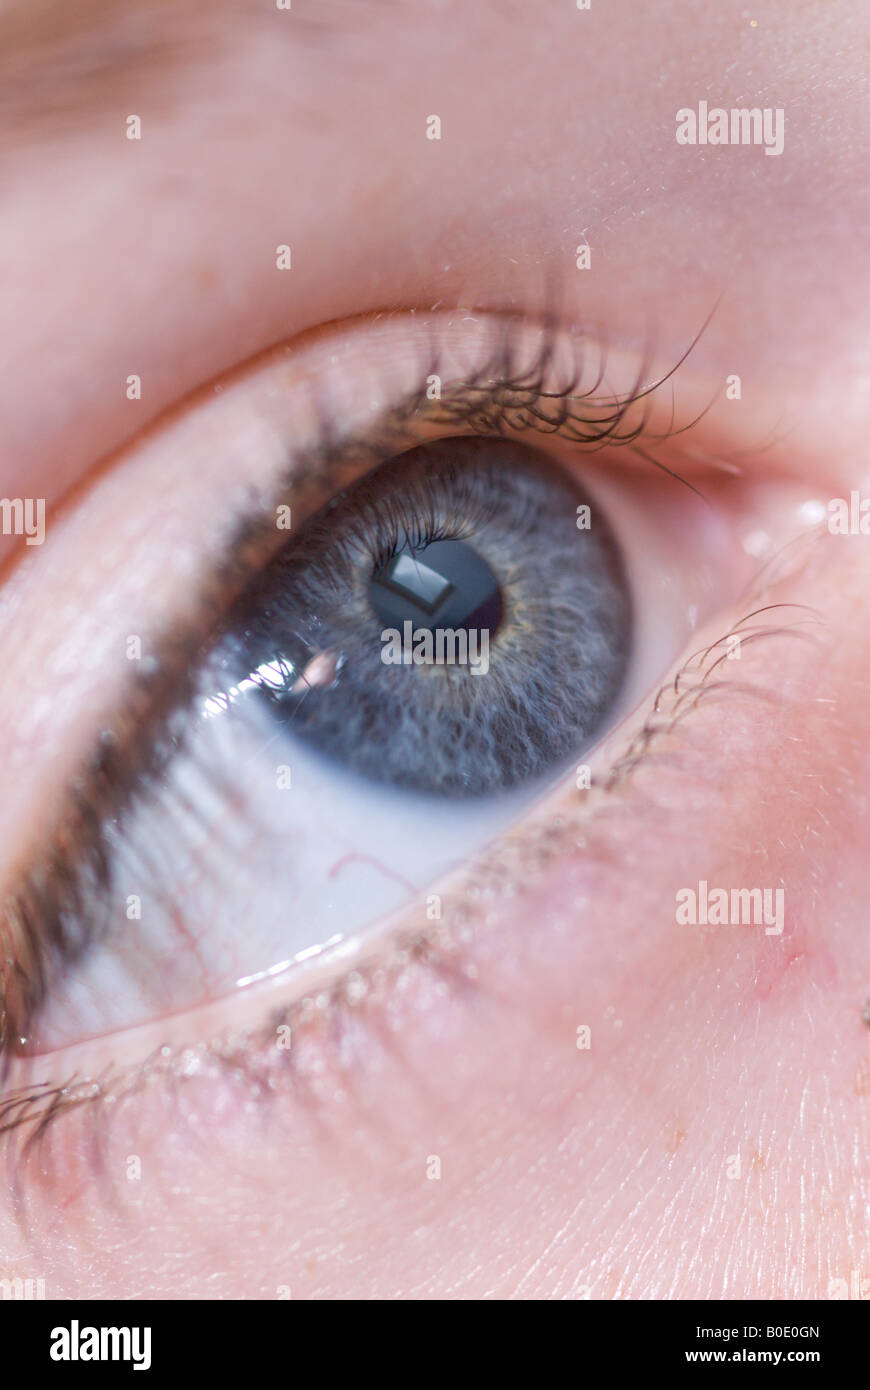 Close up of a 12 year old caucasian girl's eye Stock Photo